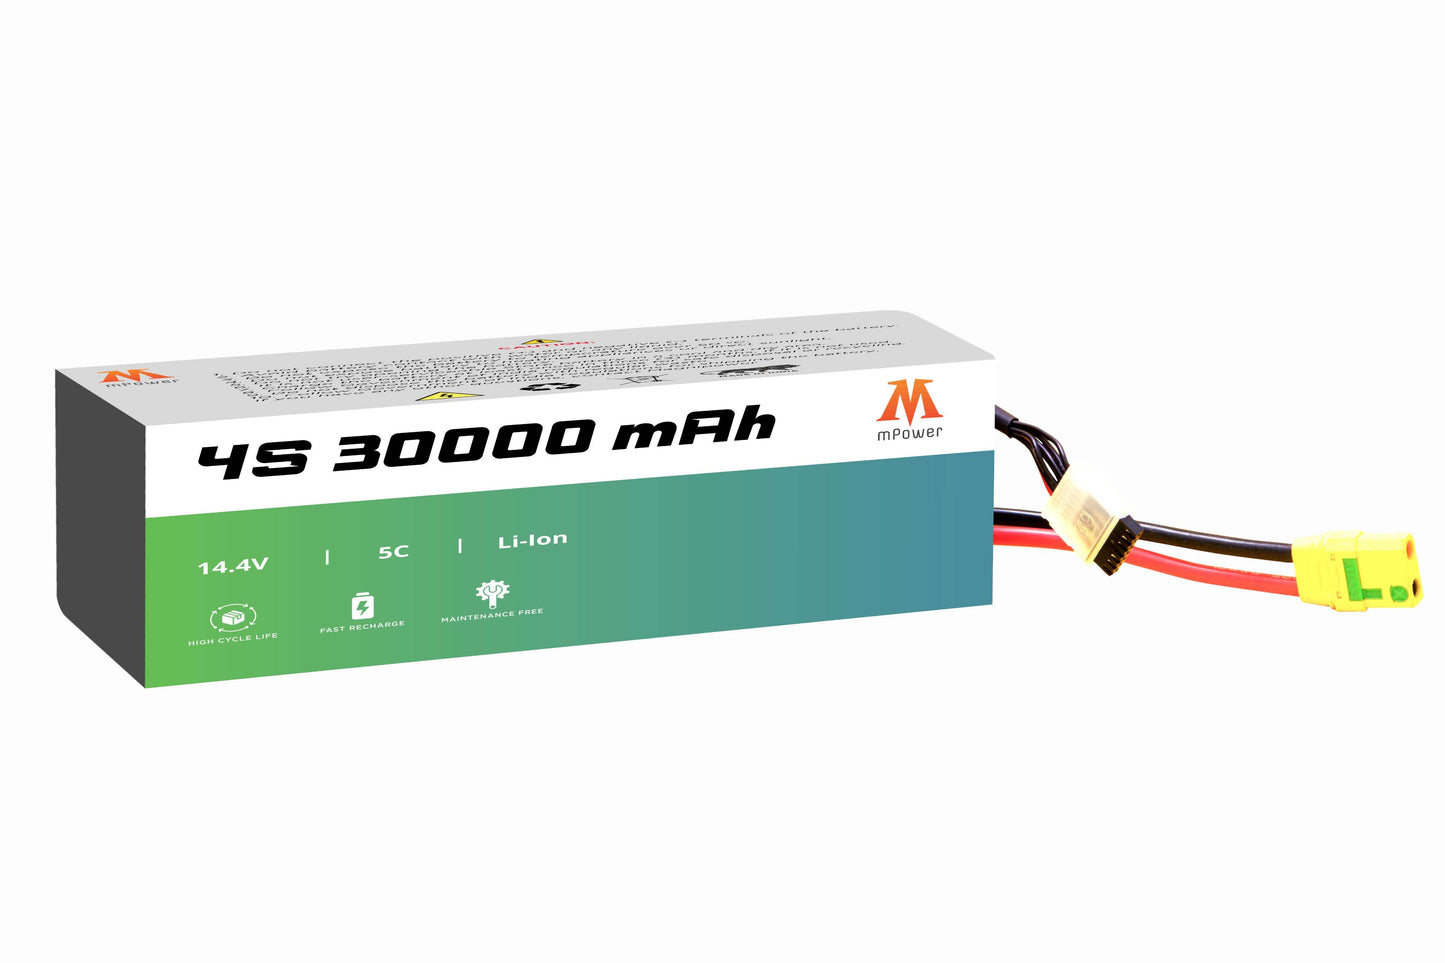 mPower 4S 30000mAh Lithium-Ion Battery for Survey Drones